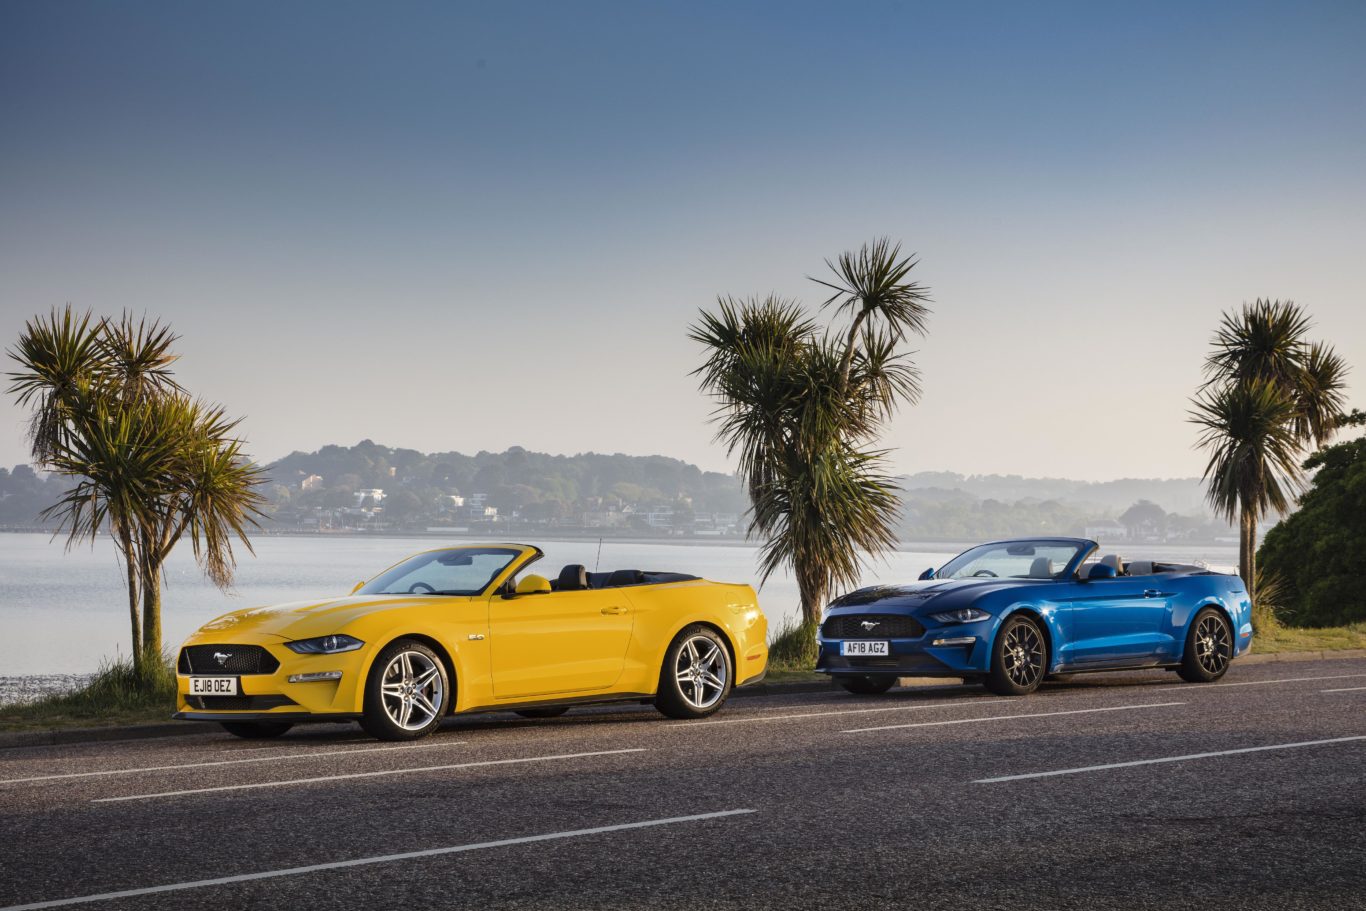 Both coupe and convertible versions gain the updates